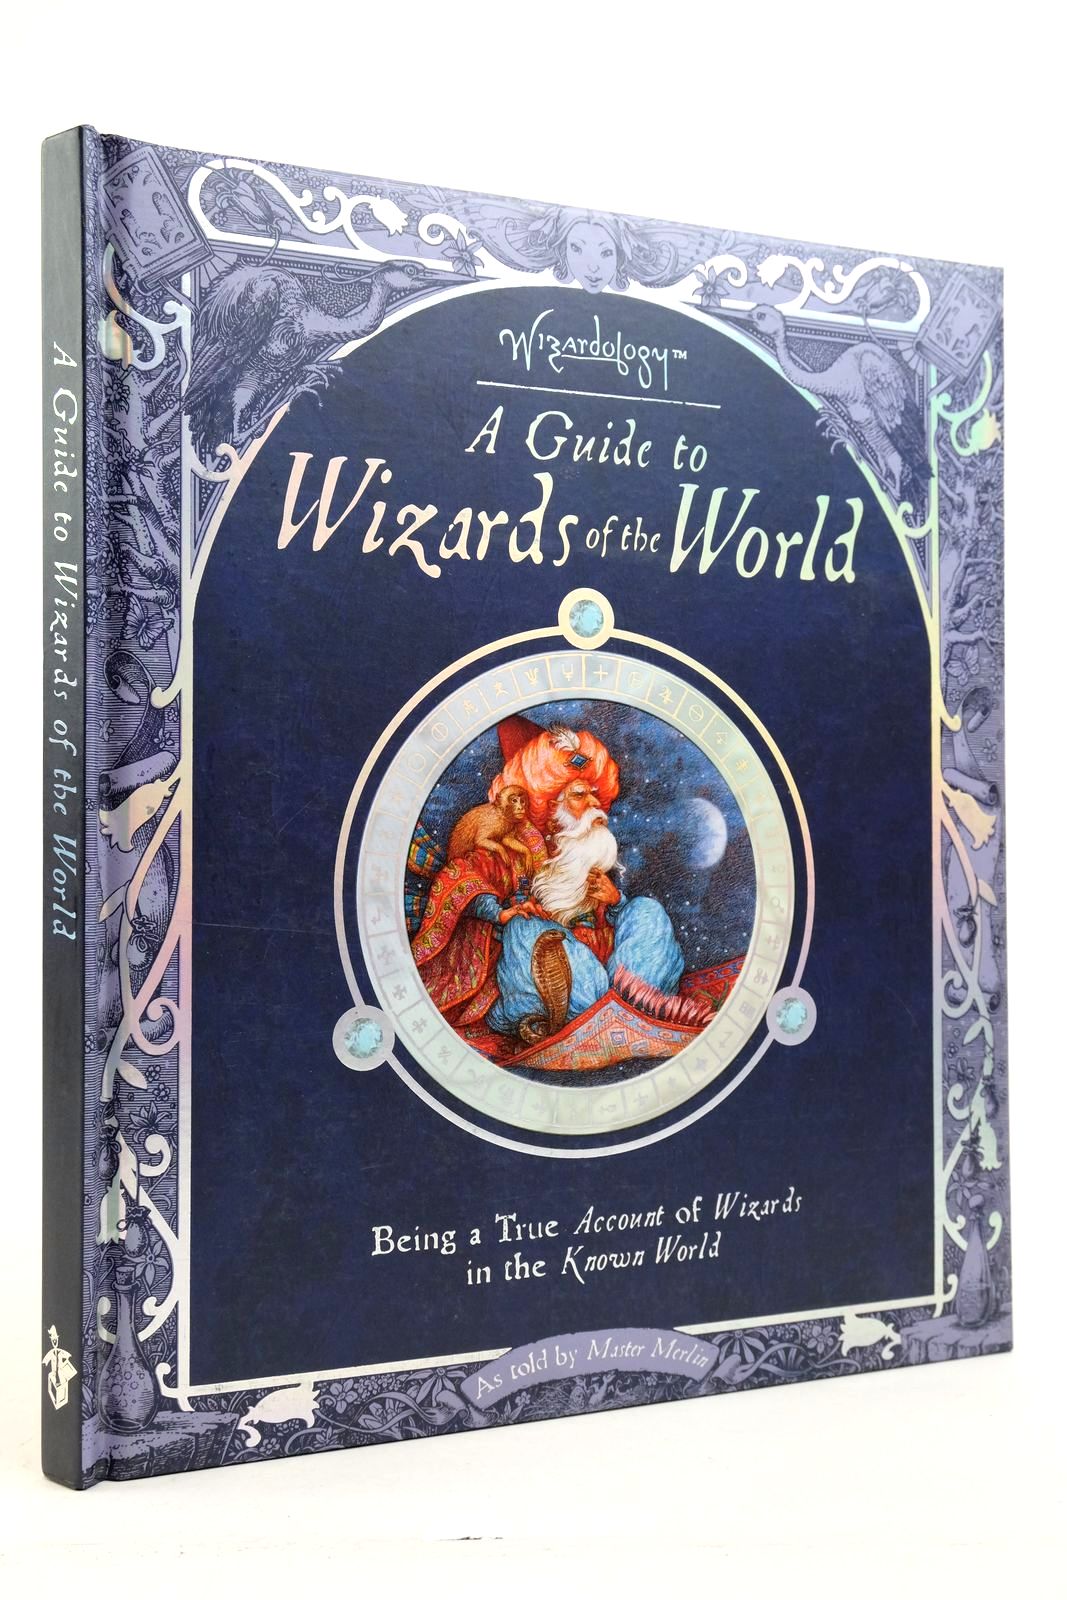 Photo of A GUIDE TO WIZARDS OF THE WORLD written by Steer, Dugald Wood, A.J. illustrated by Howe, John et al., published by Templar Publishing (STOCK CODE: 2139280)  for sale by Stella & Rose's Books